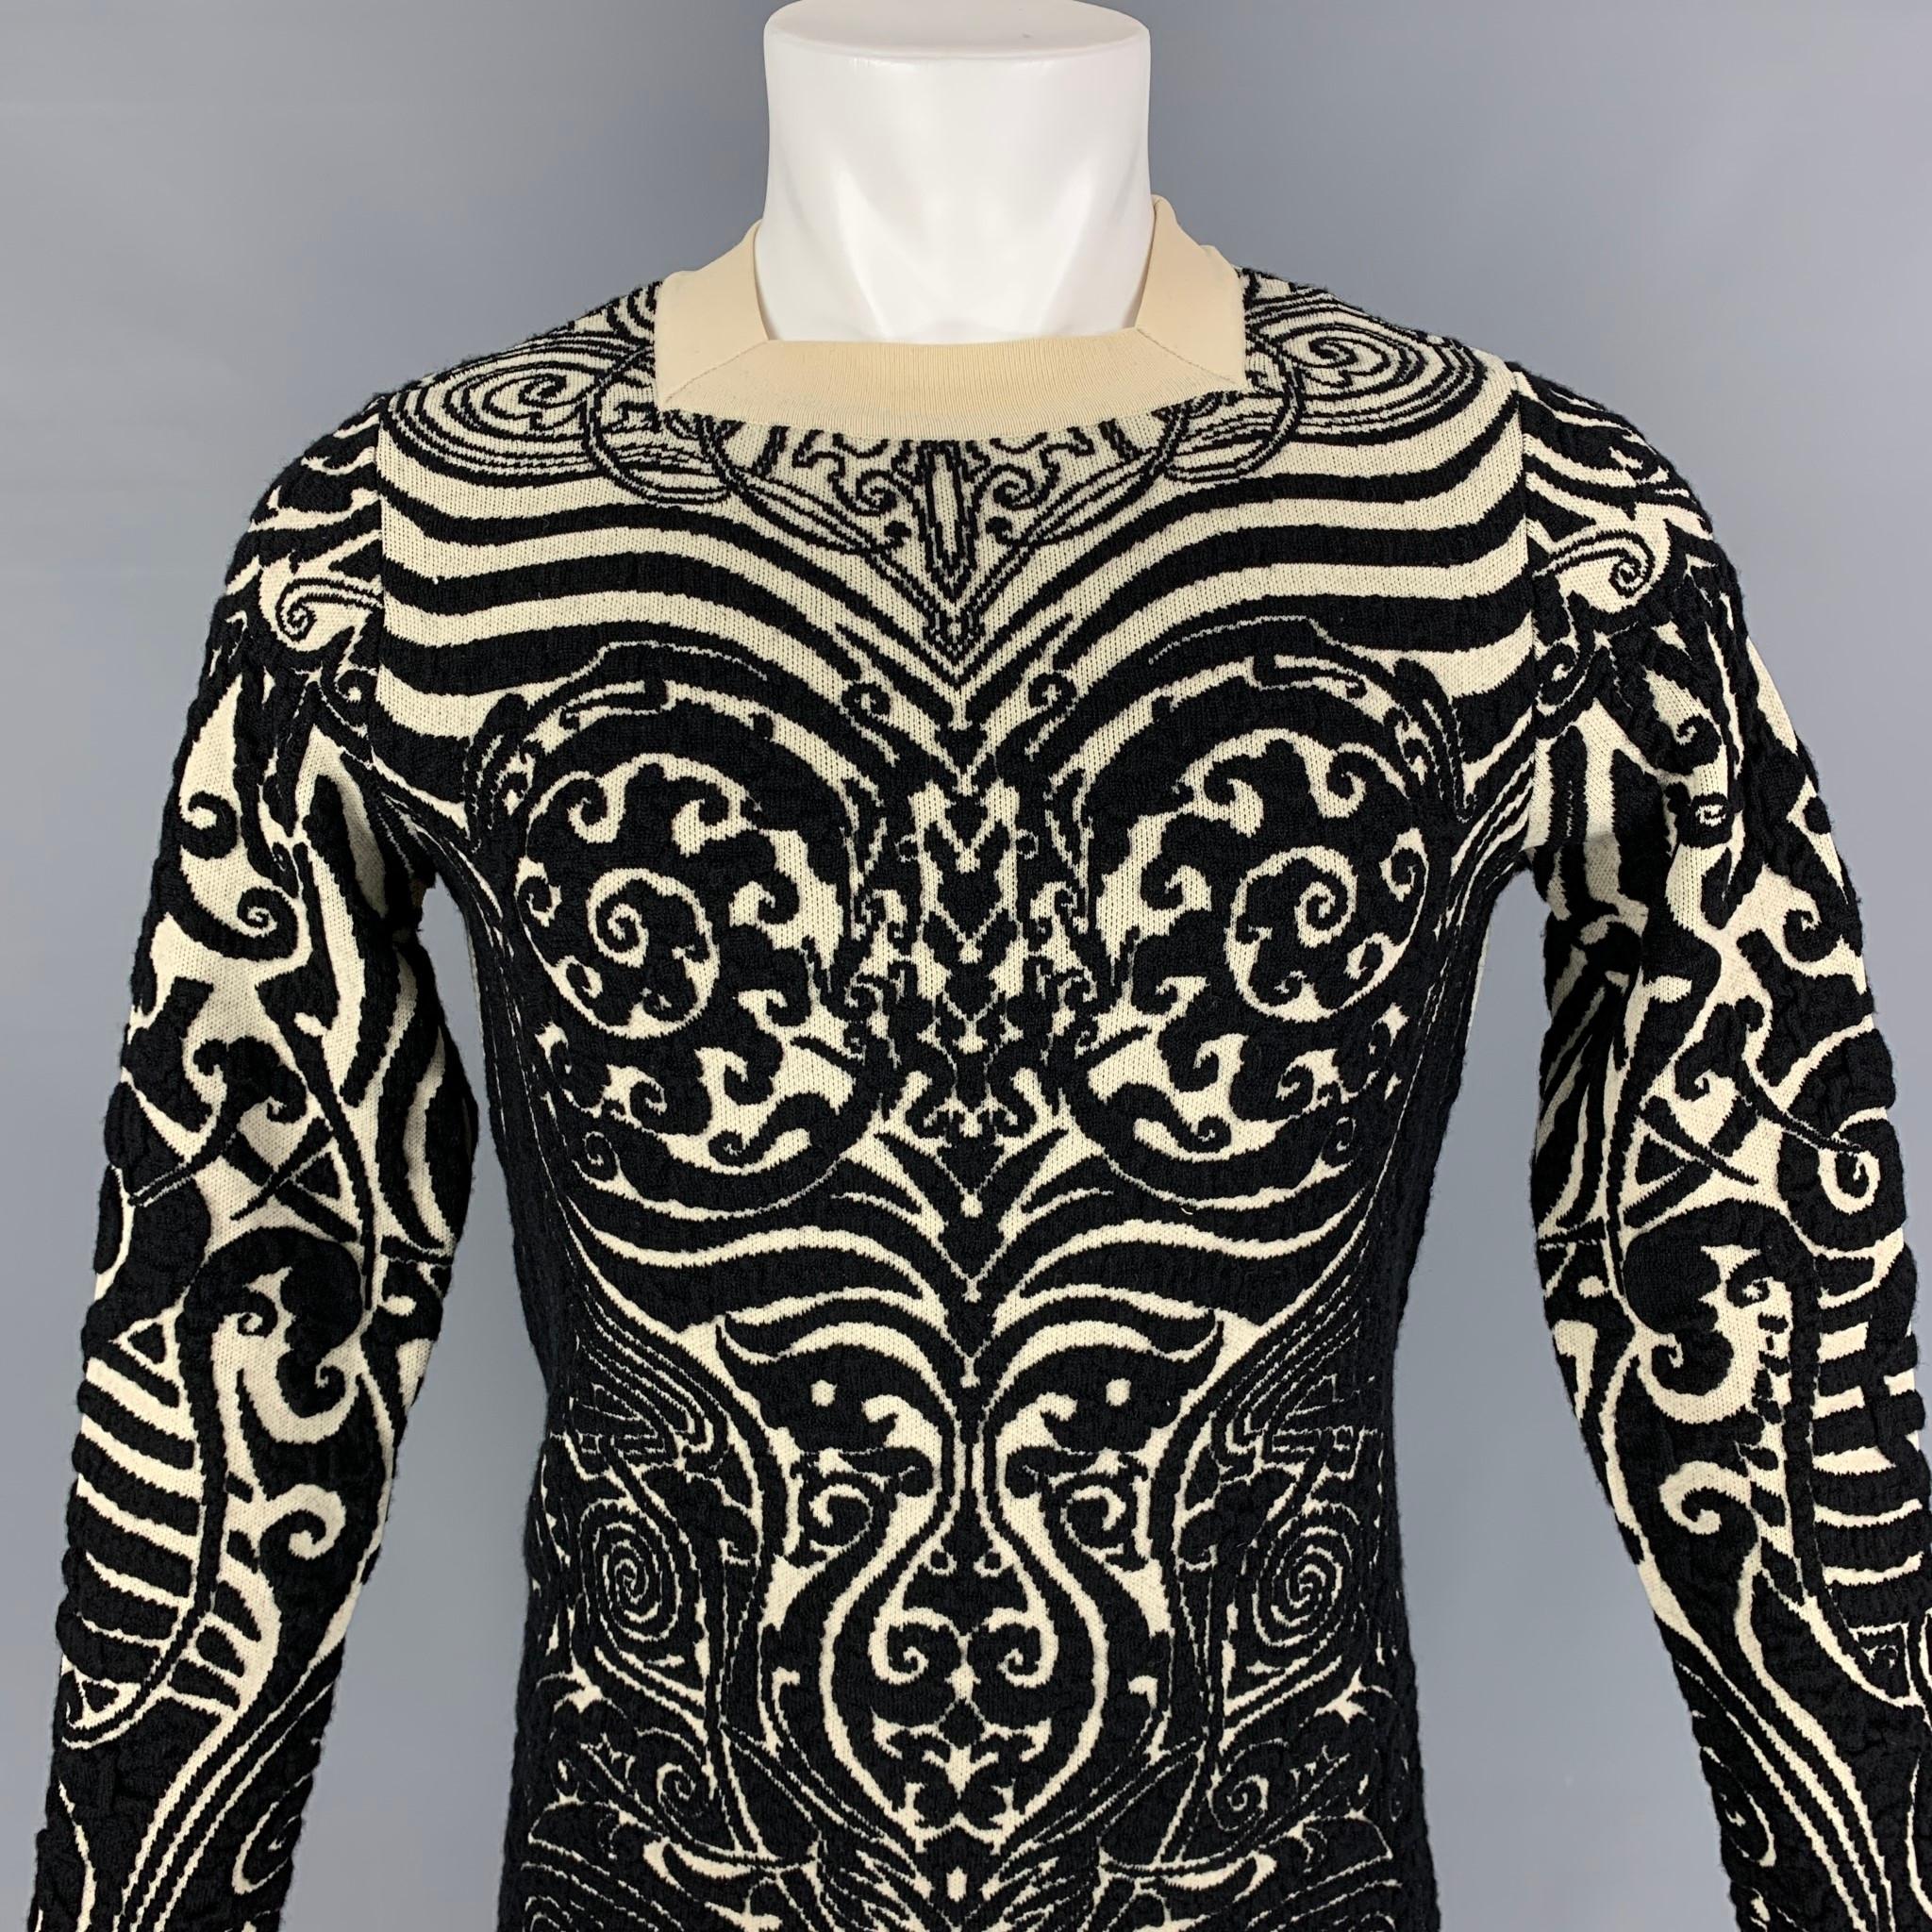 Vintage 1990's JEAN PAUL GAULTIER pullover comes in a black & beige tattoo design wool / polyamide featuring a square neck-line. Made in Italy. 

Very Good Pre-Owned Condition.
Marked: M

Measurements:

Shoulder: 16.5 in.
Chest: 38 in.
Sleeve: 28